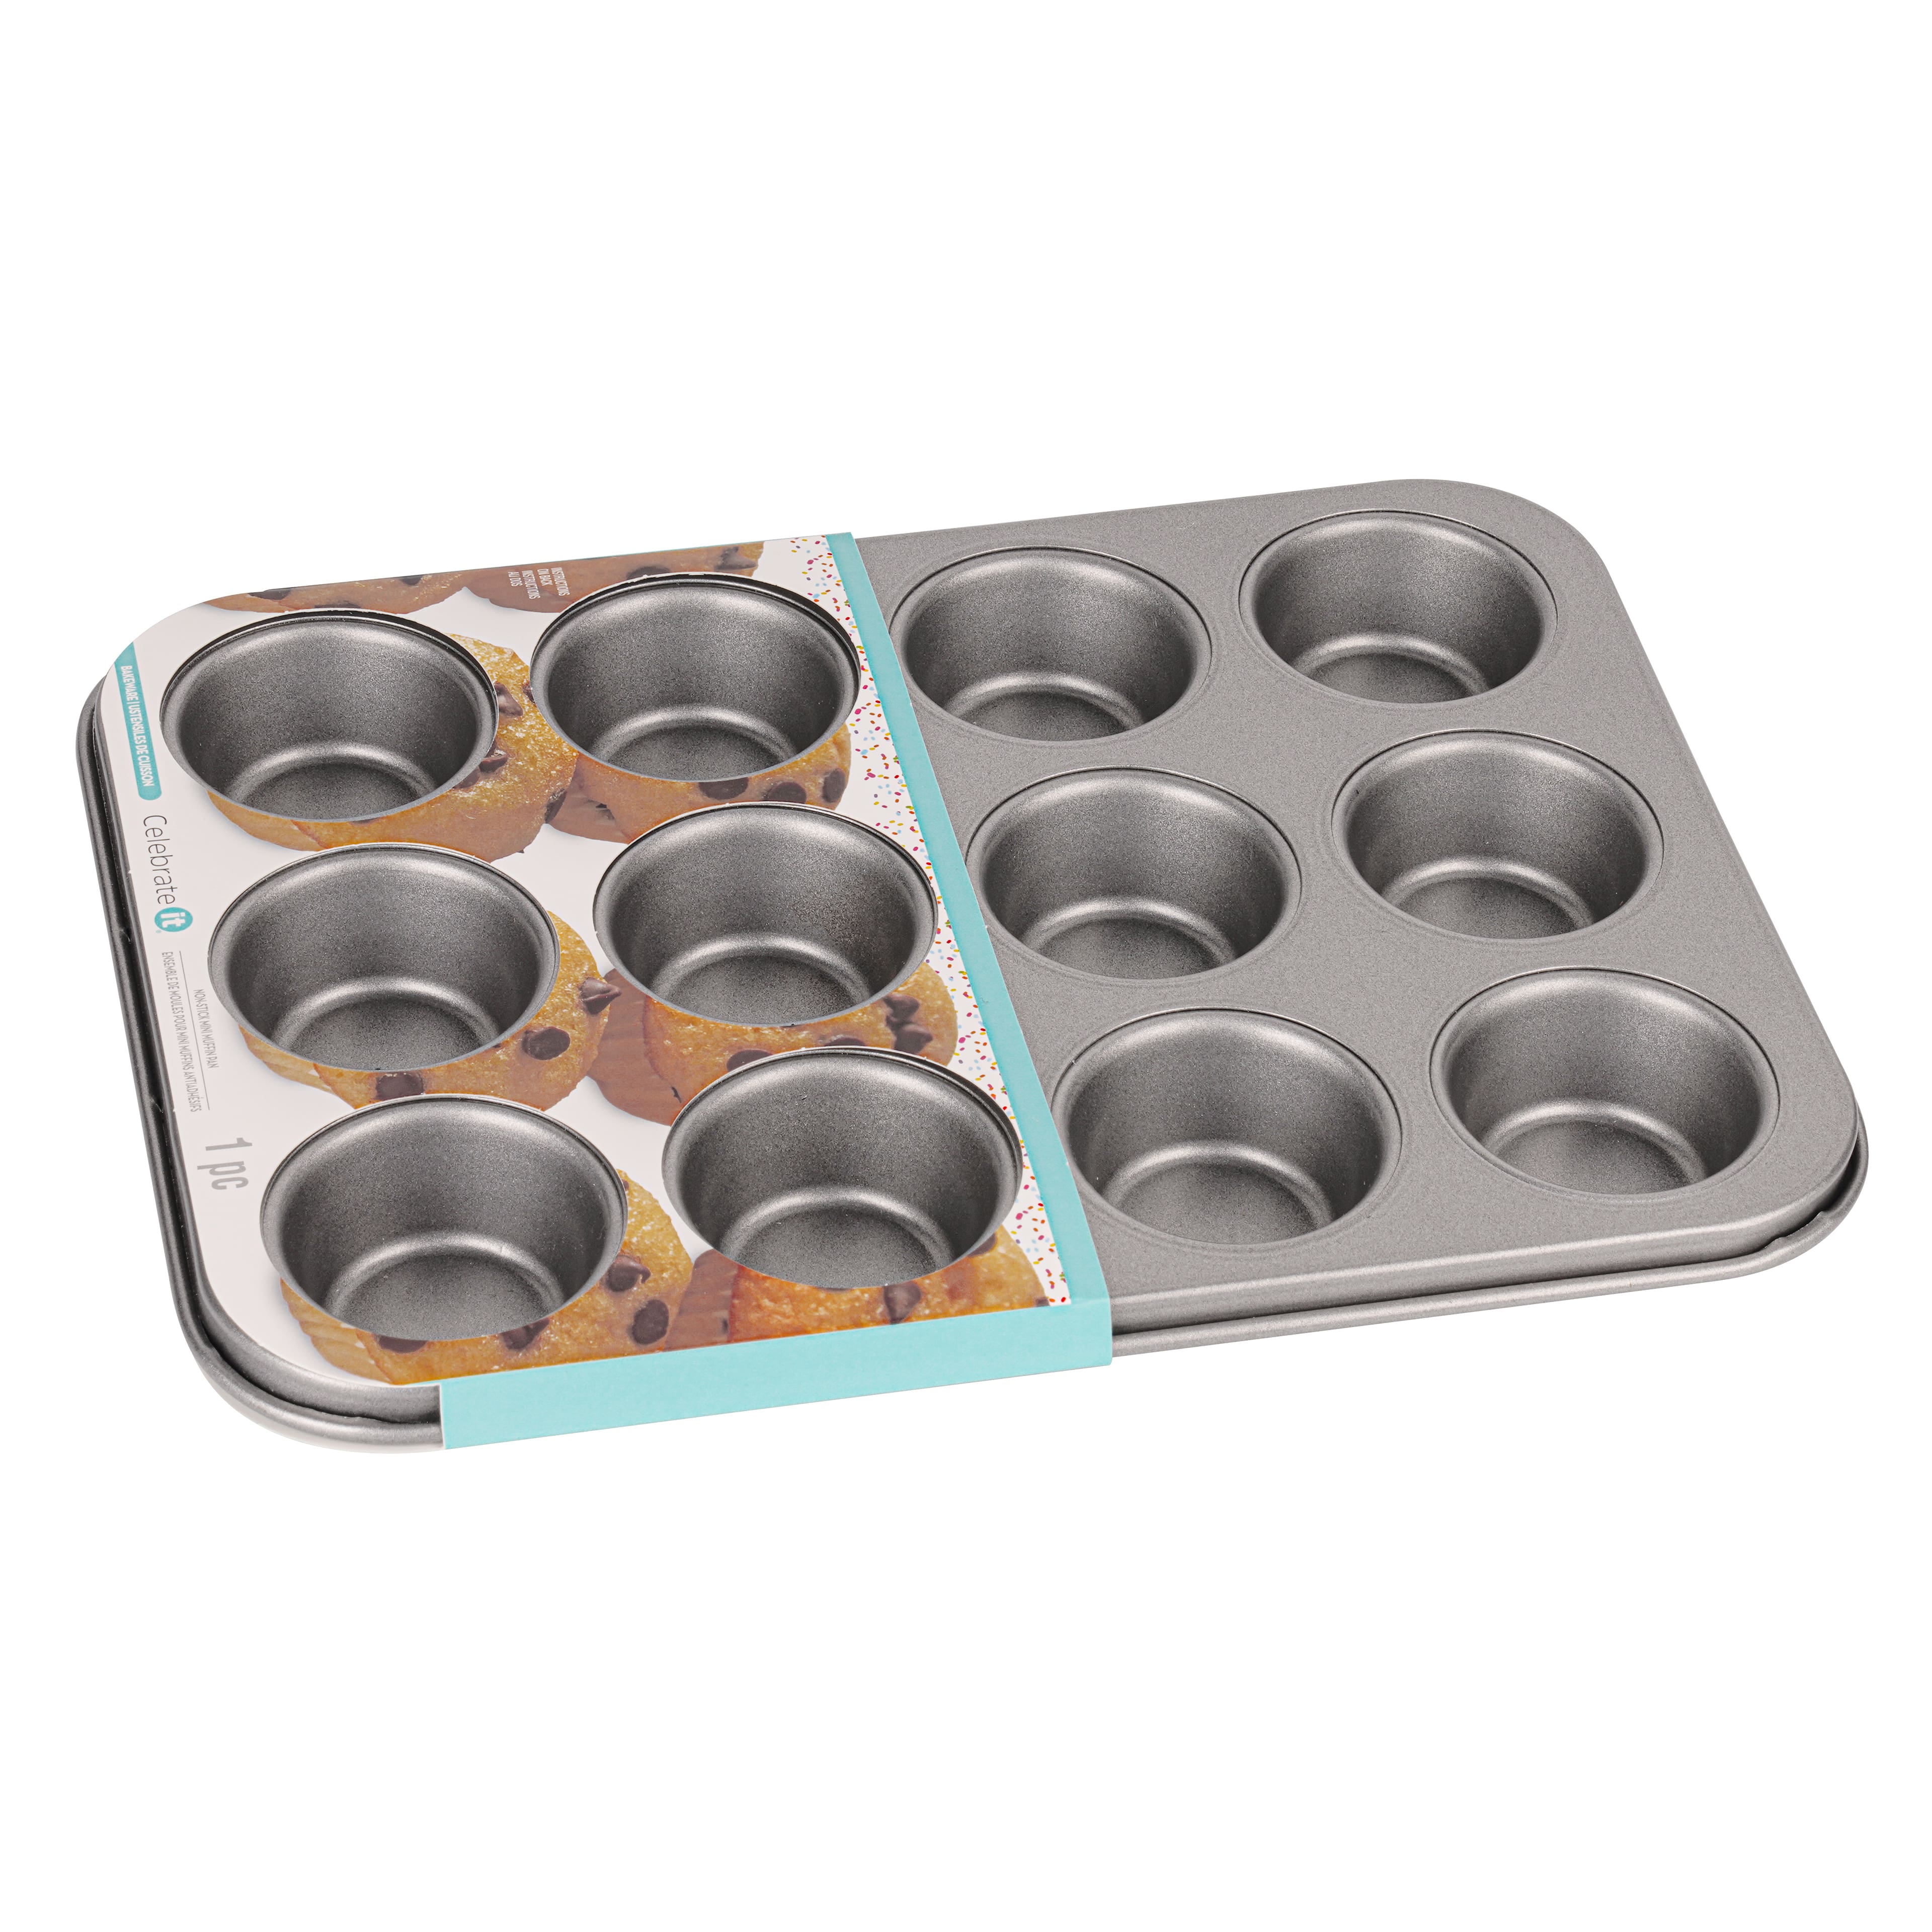 Save on Copperhead Collection Muffin Pan 12 Cup Order Online